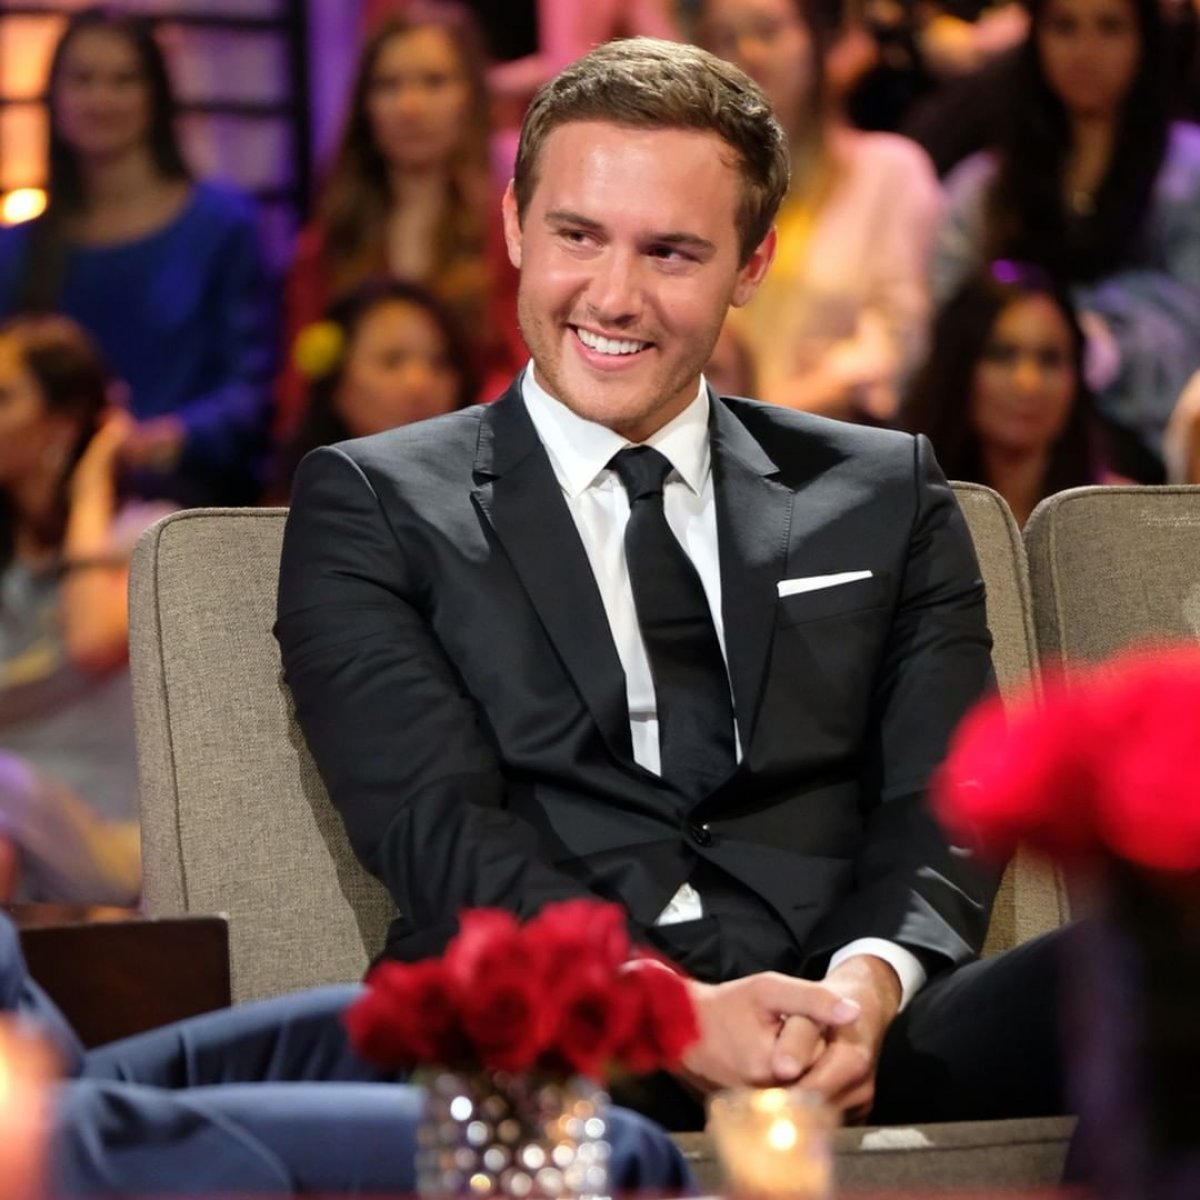 'The Bachelor' star Peter Weber reveals injury scar on face two months after fall ...1200 x 1200